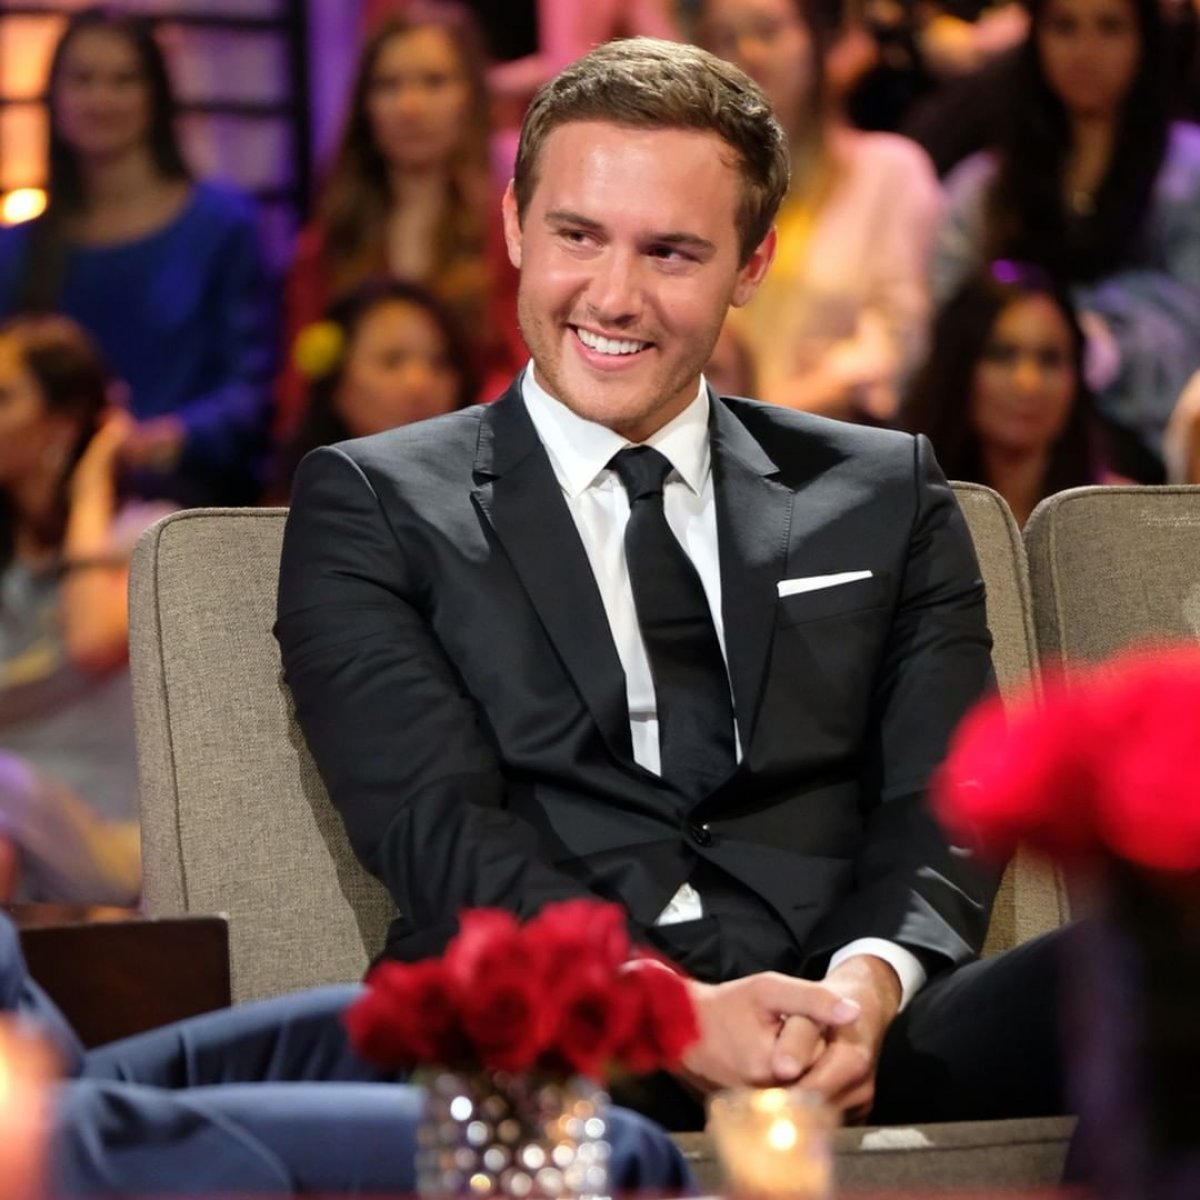 'The Bachelor' star Peter Weber reveals injury scar on face two months after fall ...1200 x 1200